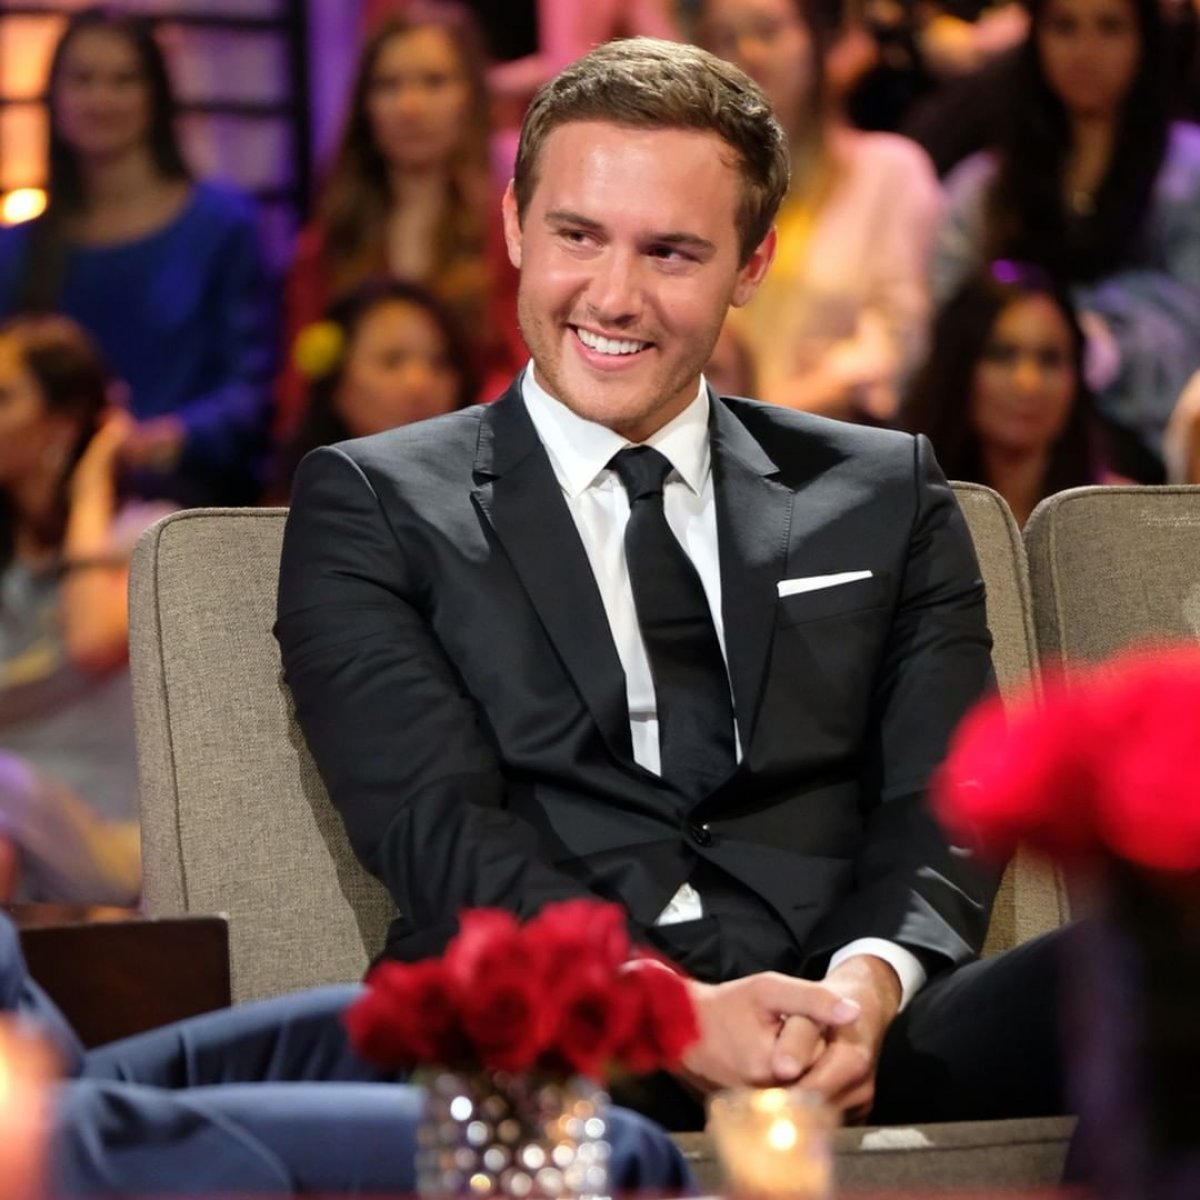 'The Bachelor' star Peter Weber reveals injury scar on face two months after fall ...1200 x 1200